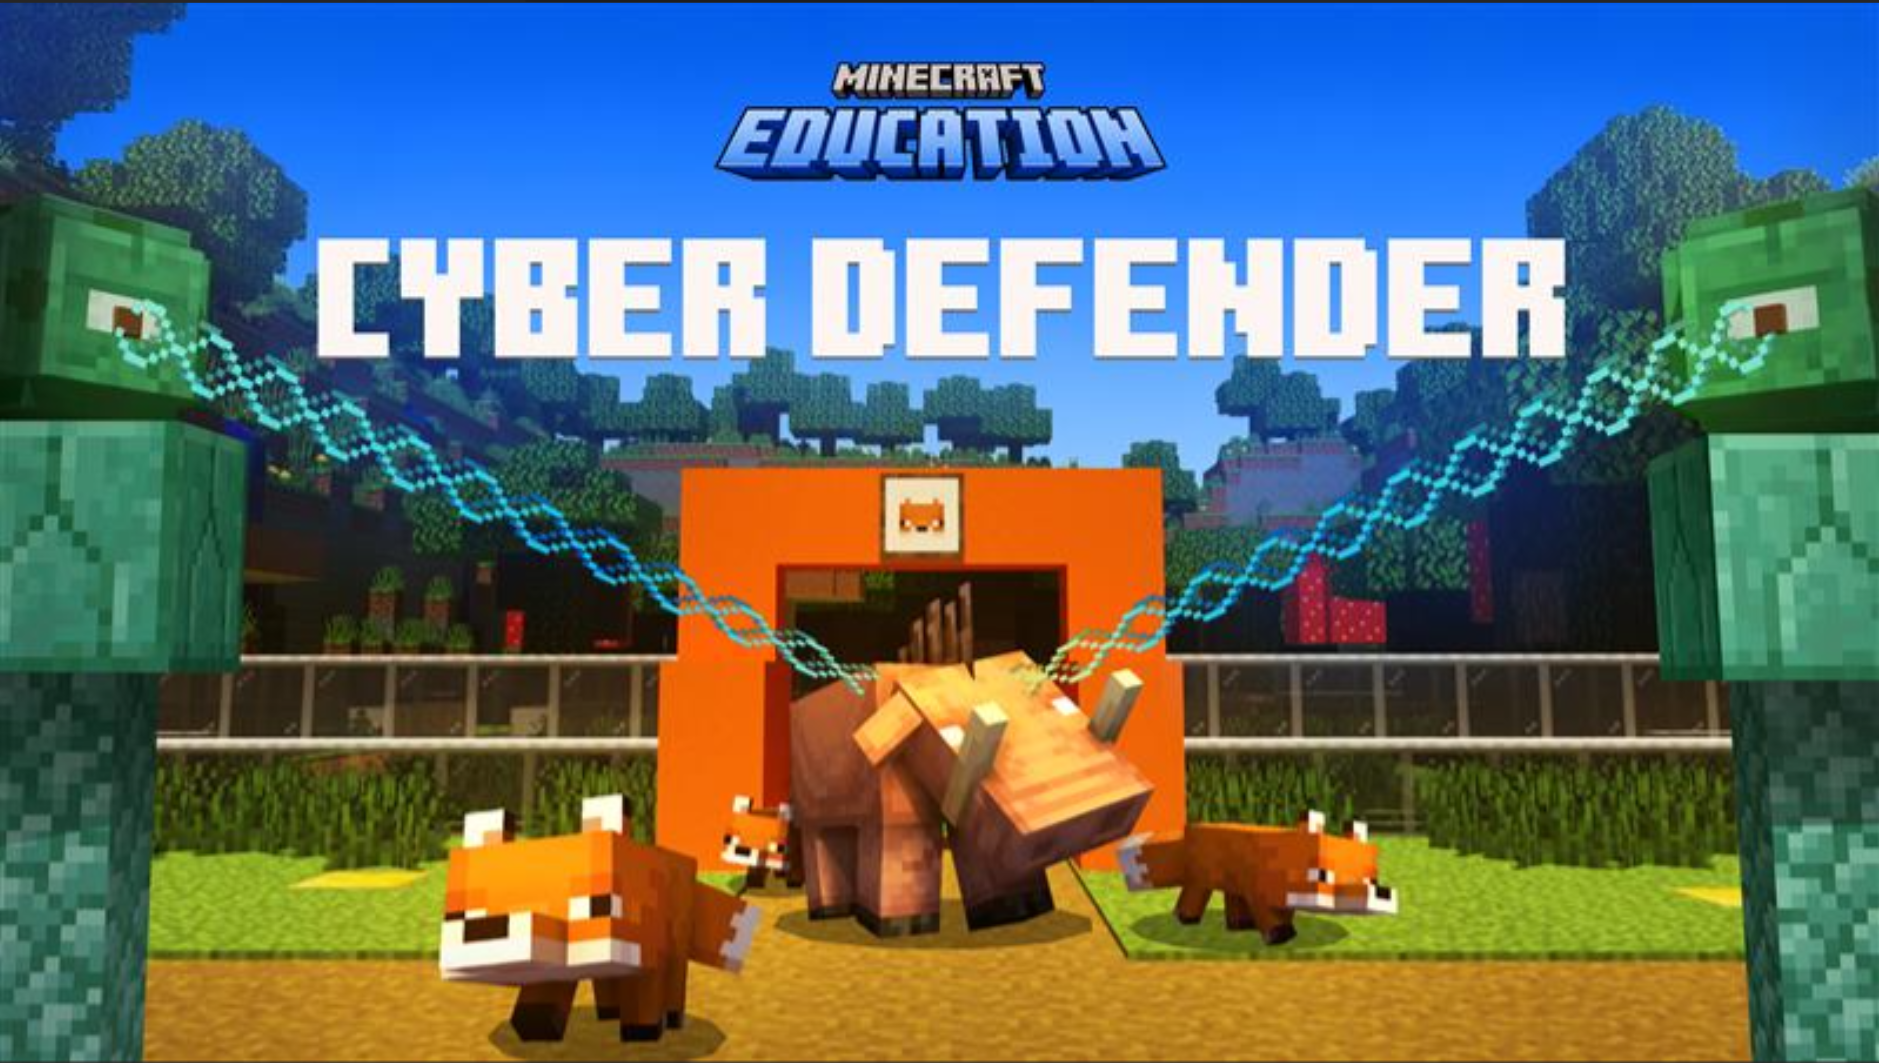 Join students around the world in the first-ever Minecraft